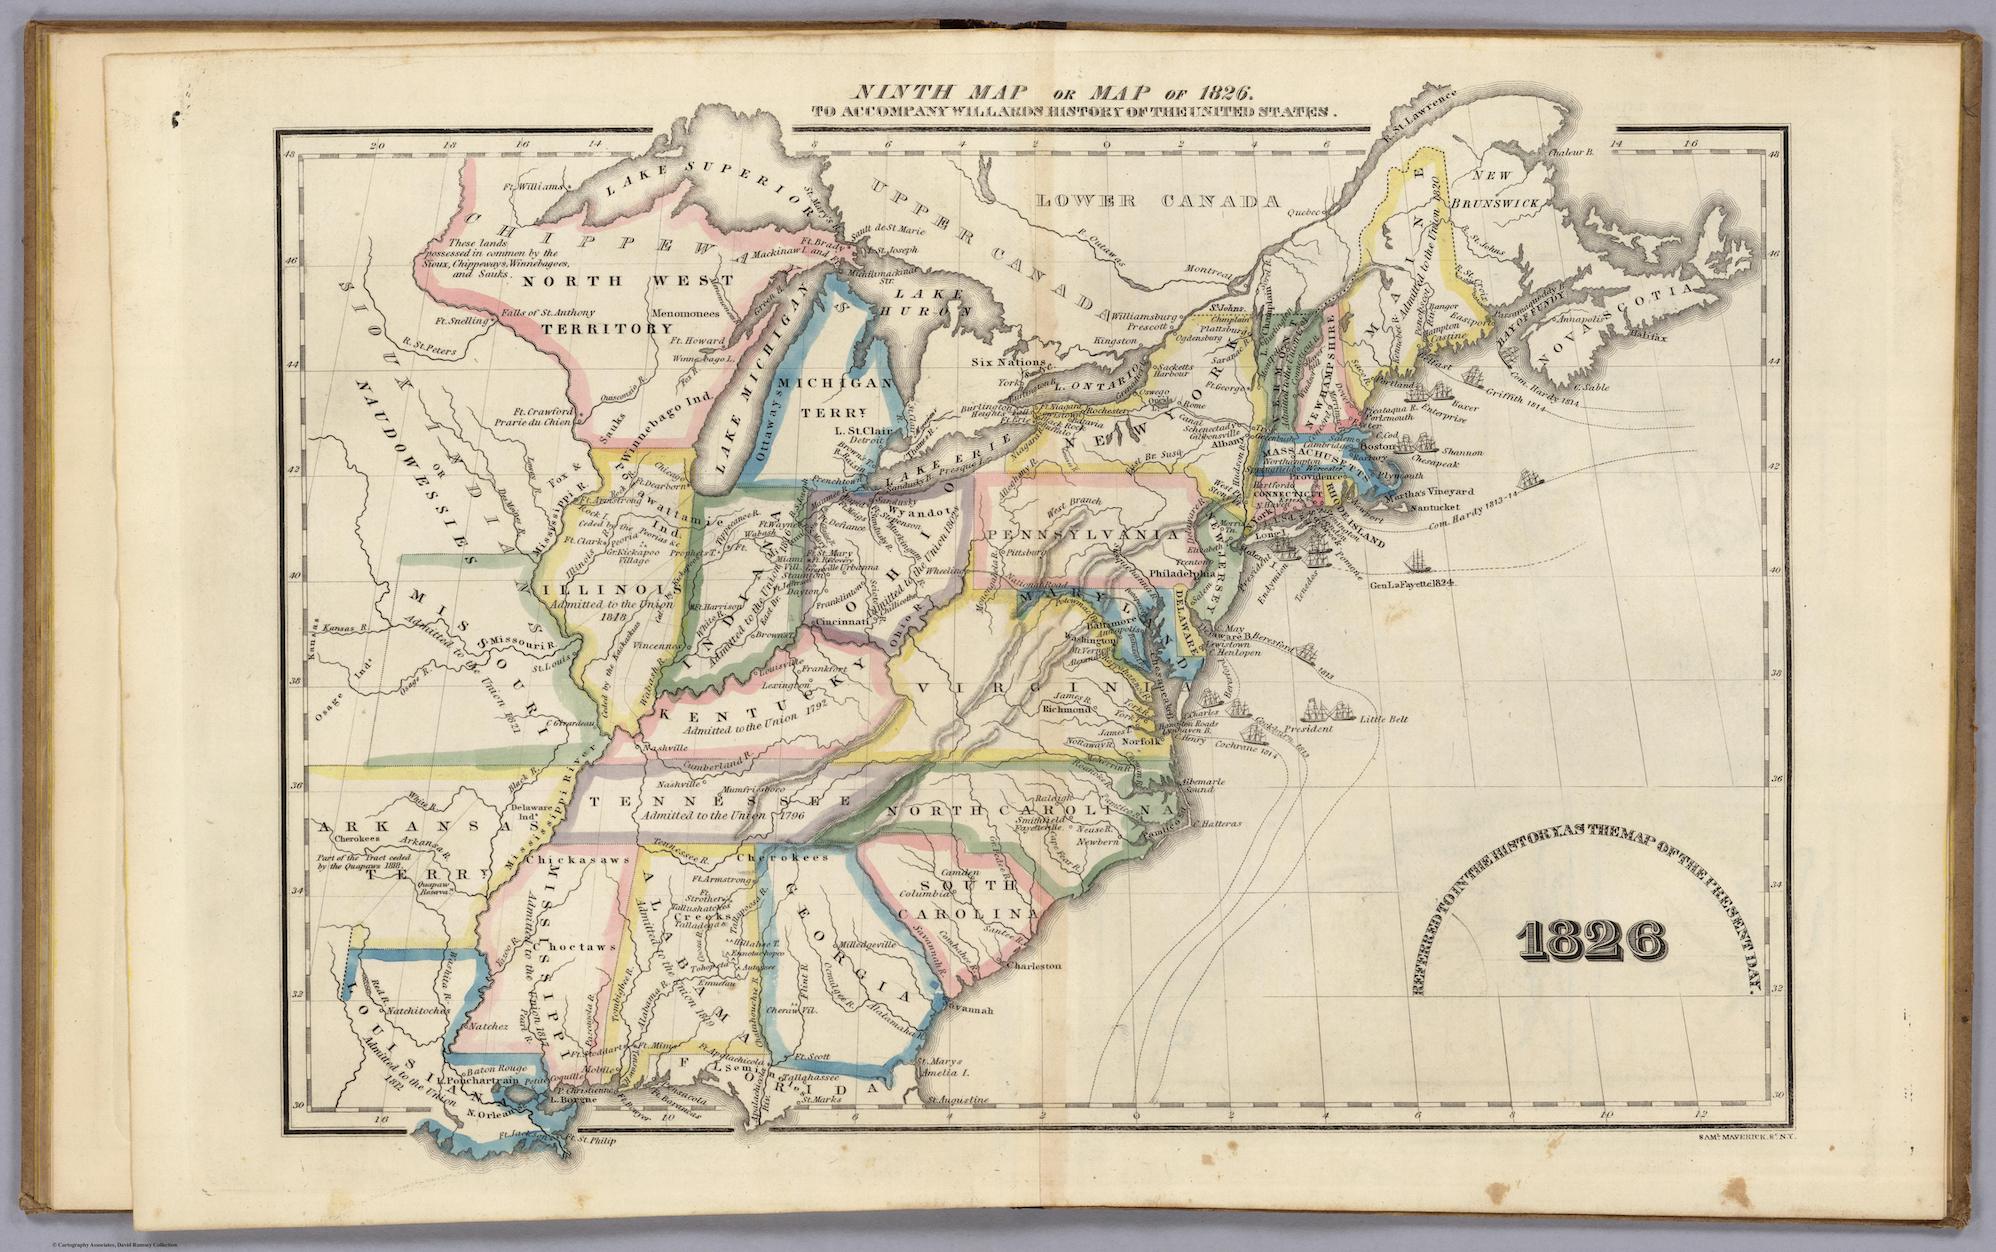 The final map in the series that shows the United States in 1826. The states, now including Alabama, Mississippi, Louisiana, Arkansas, Missouri, Illinois, Indiana, Ohio, Vermont, Michigan “Terry” and North West “Territory,” which would become Wisconsin, are outlined in various colors. Cities and bodies of water are named within each state, making the overall composition much busier than its previous iterations. On the leftmost side, the words “Sioux Indians or Naudowessies” are printed sideways, following the flow of the St. Peters, Des Moines, and Mississippi Rivers.